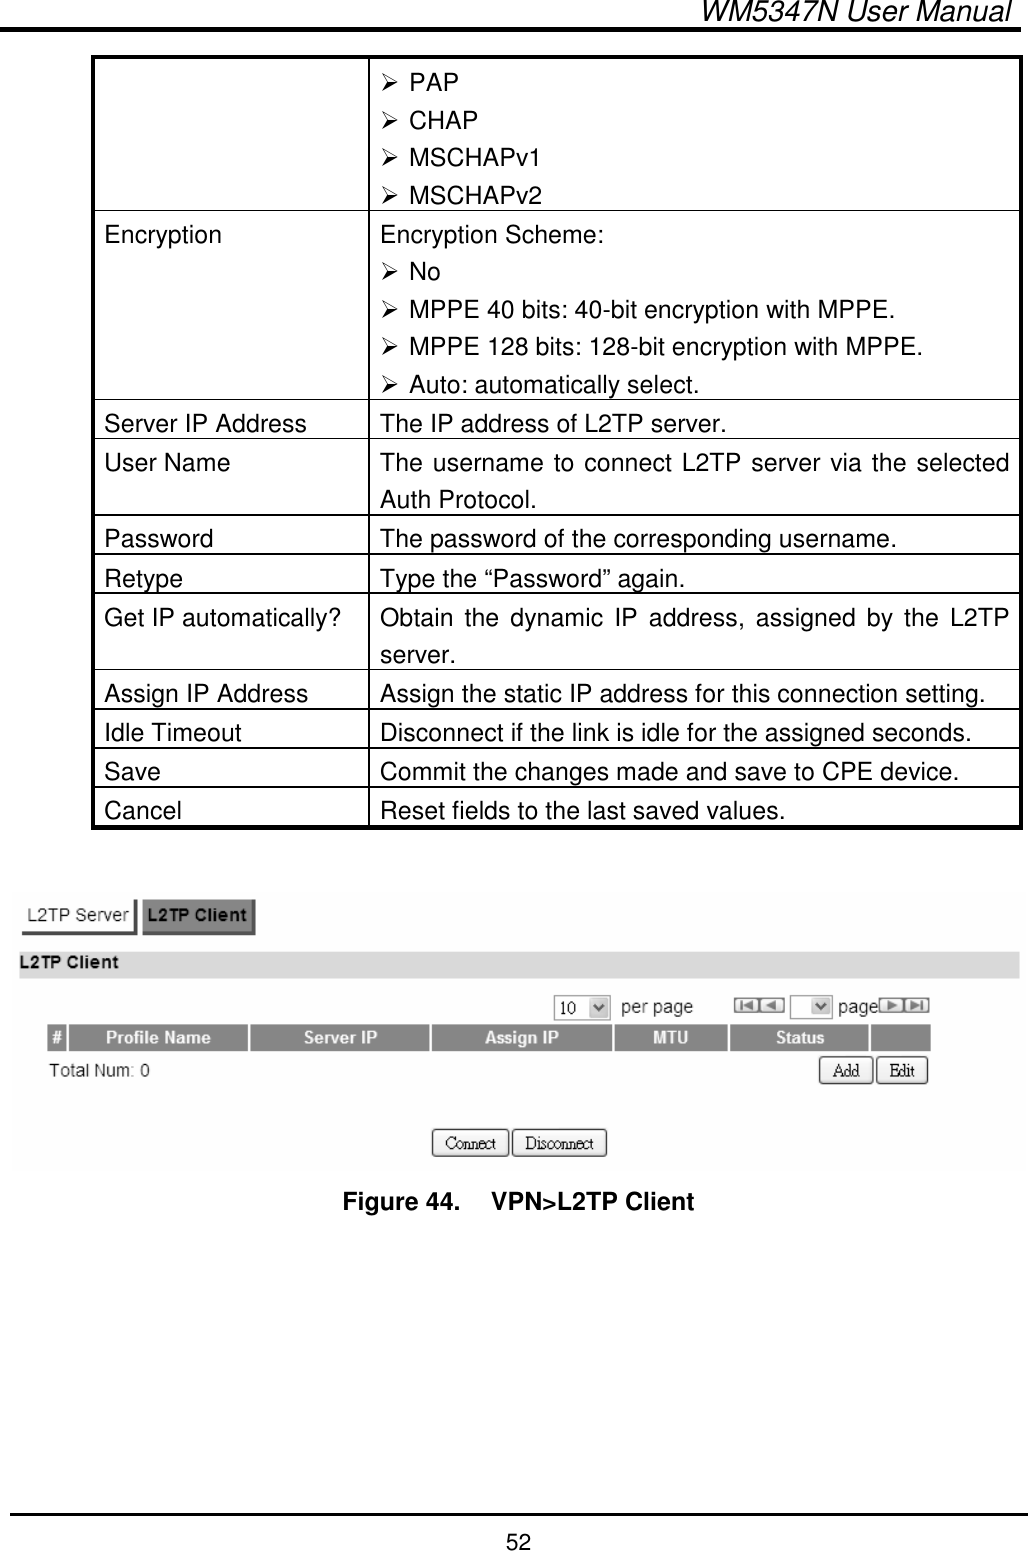  WM5347N User Manual  52  PAP  CHAP  MSCHAPv1  MSCHAPv2 Encryption  Encryption Scheme:  No  MPPE 40 bits: 40-bit encryption with MPPE.  MPPE 128 bits: 128-bit encryption with MPPE.  Auto: automatically select. Server IP Address  The IP address of L2TP server. User Name  The username to connect L2TP server via the selected Auth Protocol. Password  The password of the corresponding username. Retype  Type the “Password” again. Get IP automatically?  Obtain  the  dynamic  IP  address, assigned by  the  L2TP server. Assign IP Address  Assign the static IP address for this connection setting. Idle Timeout  Disconnect if the link is idle for the assigned seconds. Save  Commit the changes made and save to CPE device. Cancel  Reset fields to the last saved values.   Figure 44.   VPN&gt;L2TP Client  